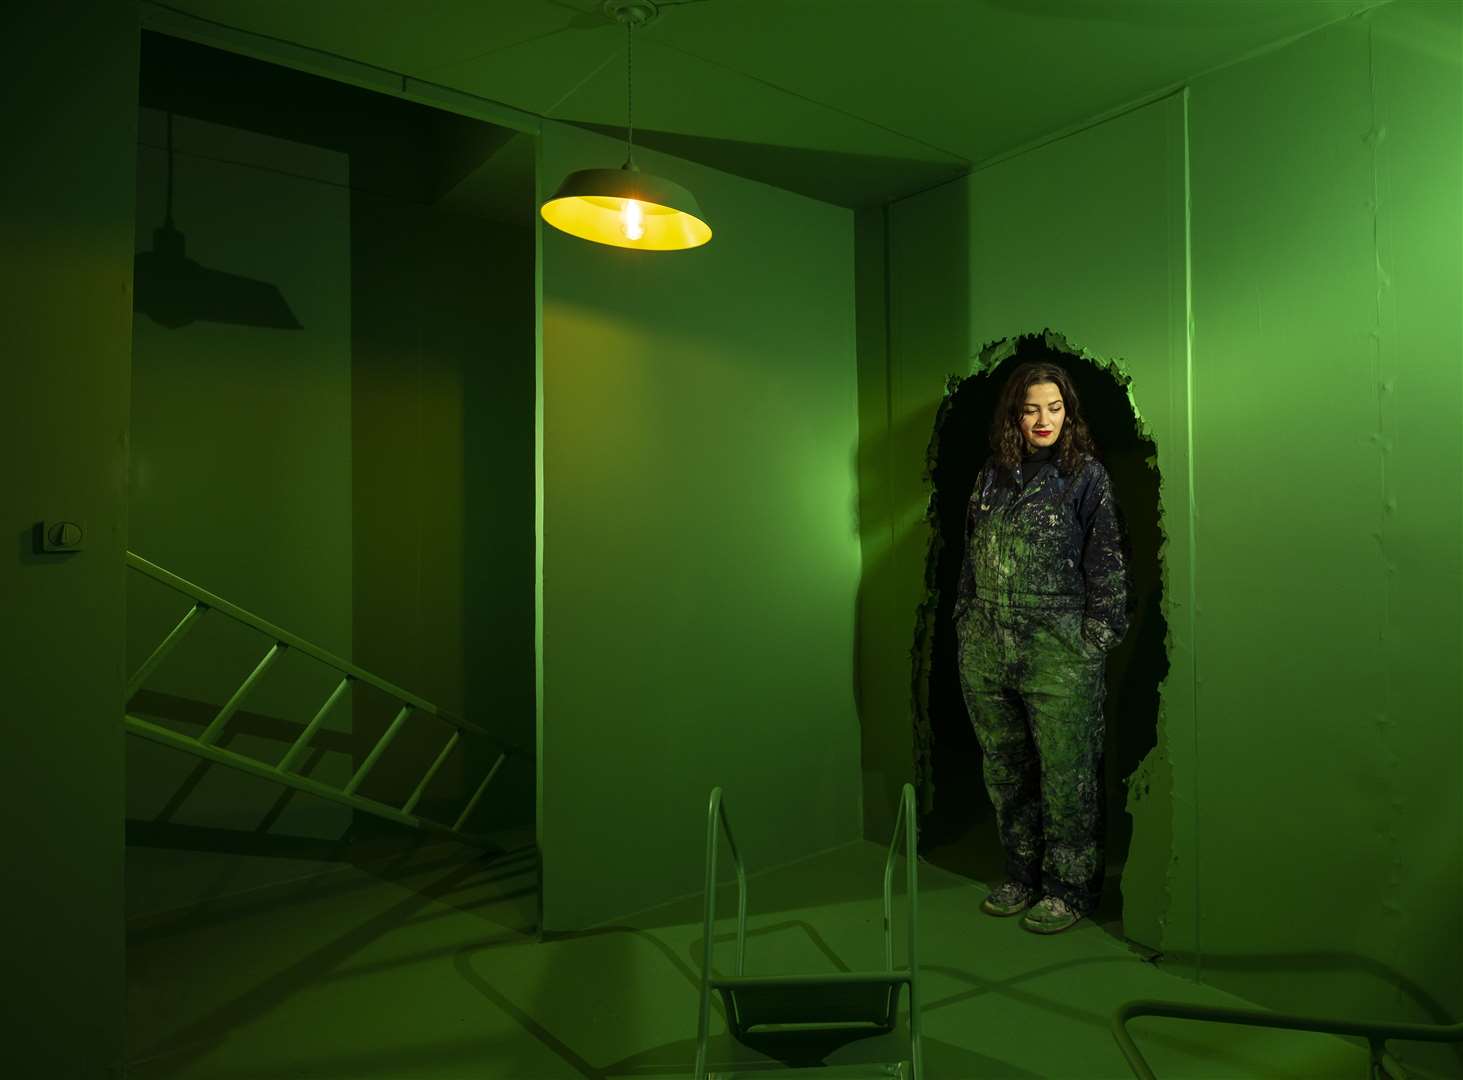 Gabrielle Gillott, from Edinburgh, in her life-size bunker installation, "Pursuit of Time", at Glenfiddich Distillery in Dufftown.